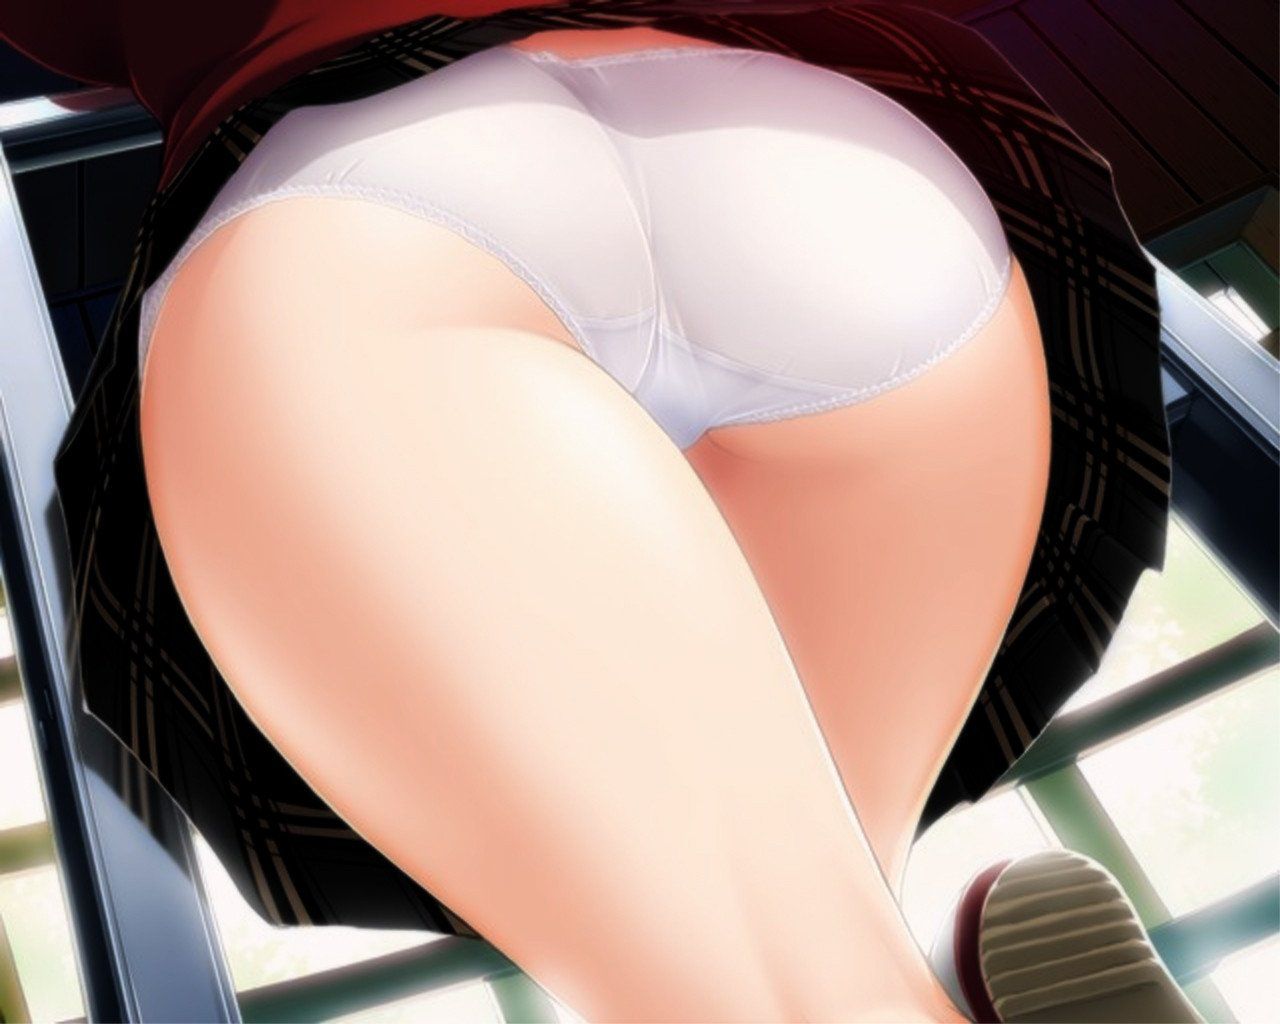 【Secondary erotica】 Here is a close-up erotic image where you can observe pants and well 13